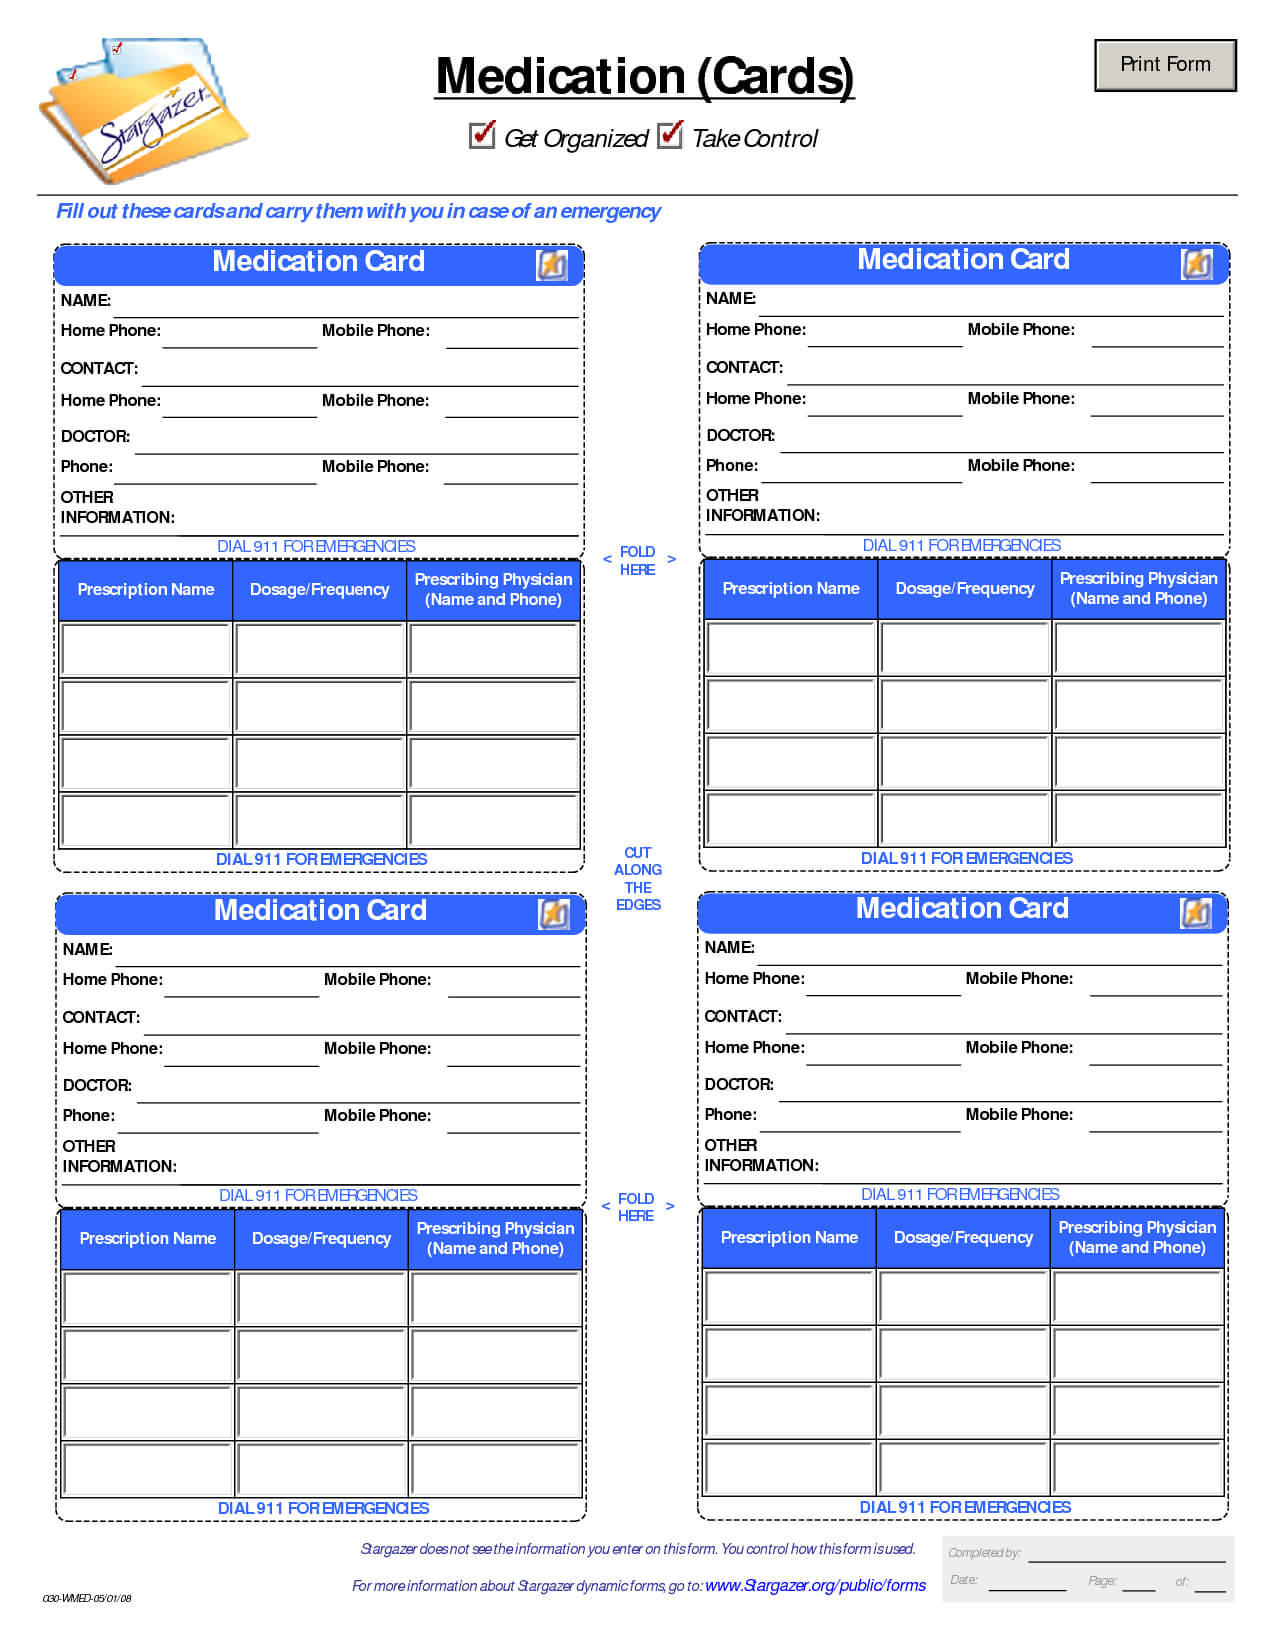 Patient Medication Card Template | Emergency Kits Regarding Medication Card Template